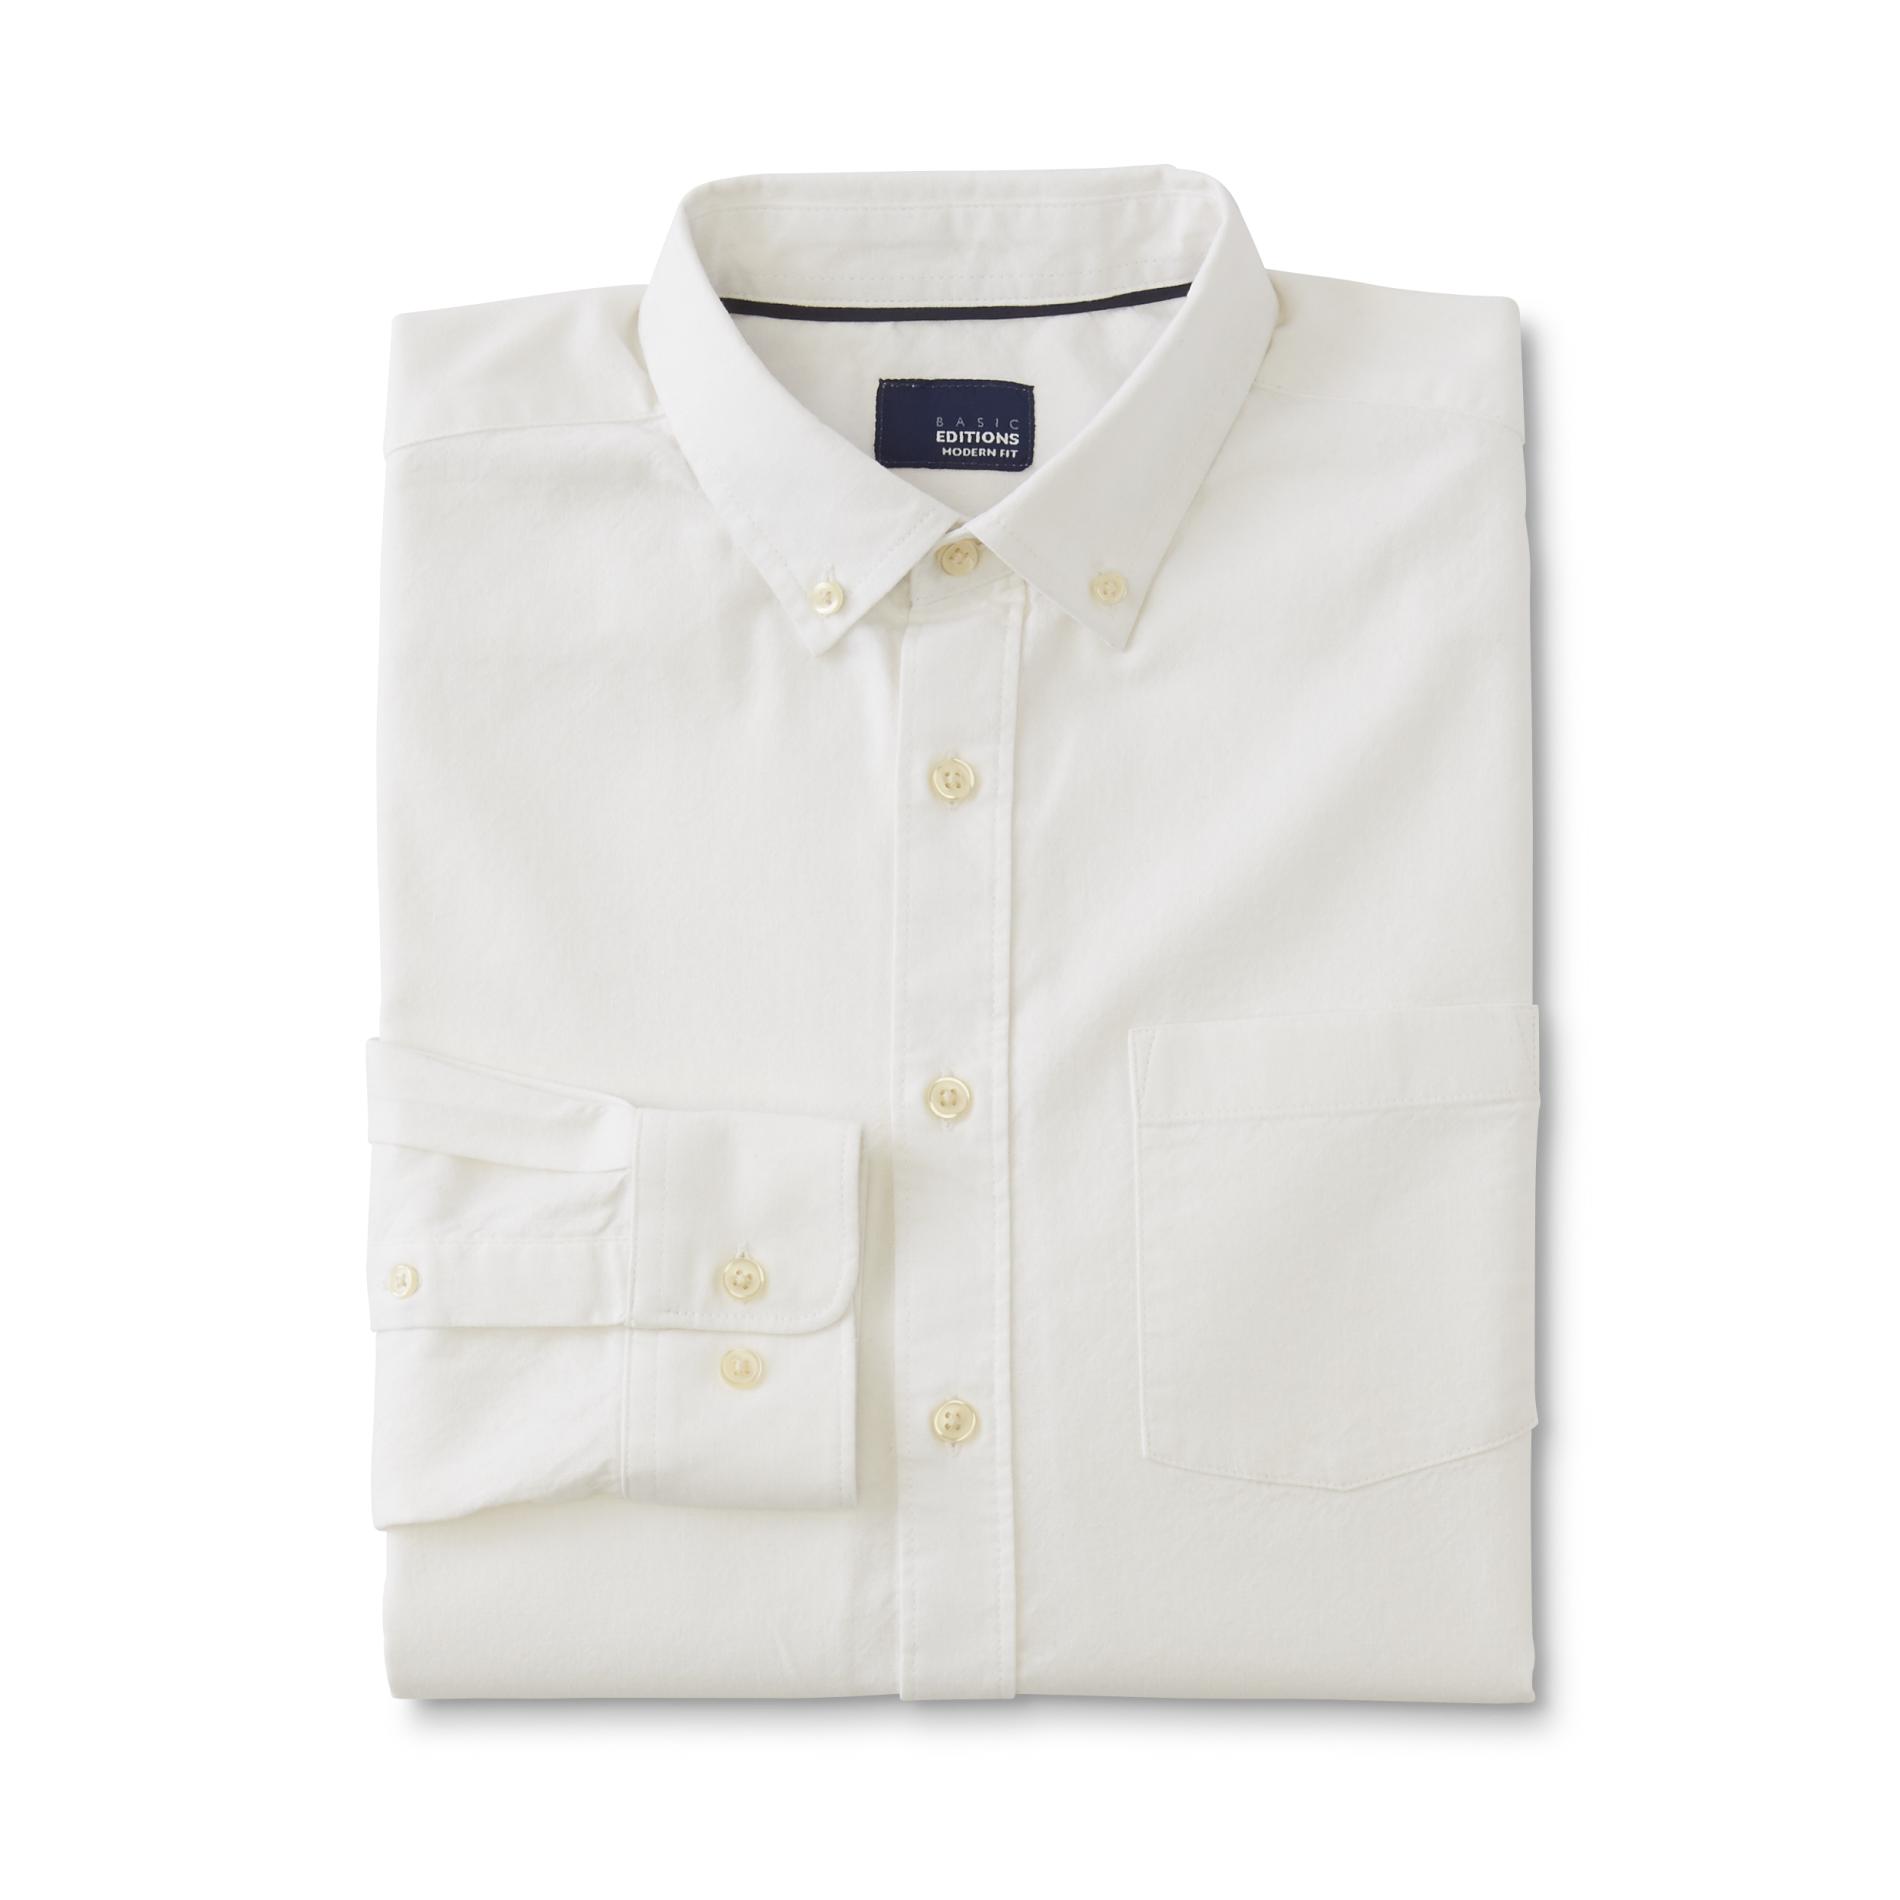 Basic Editions Men's Button-Front Oxford Shirt